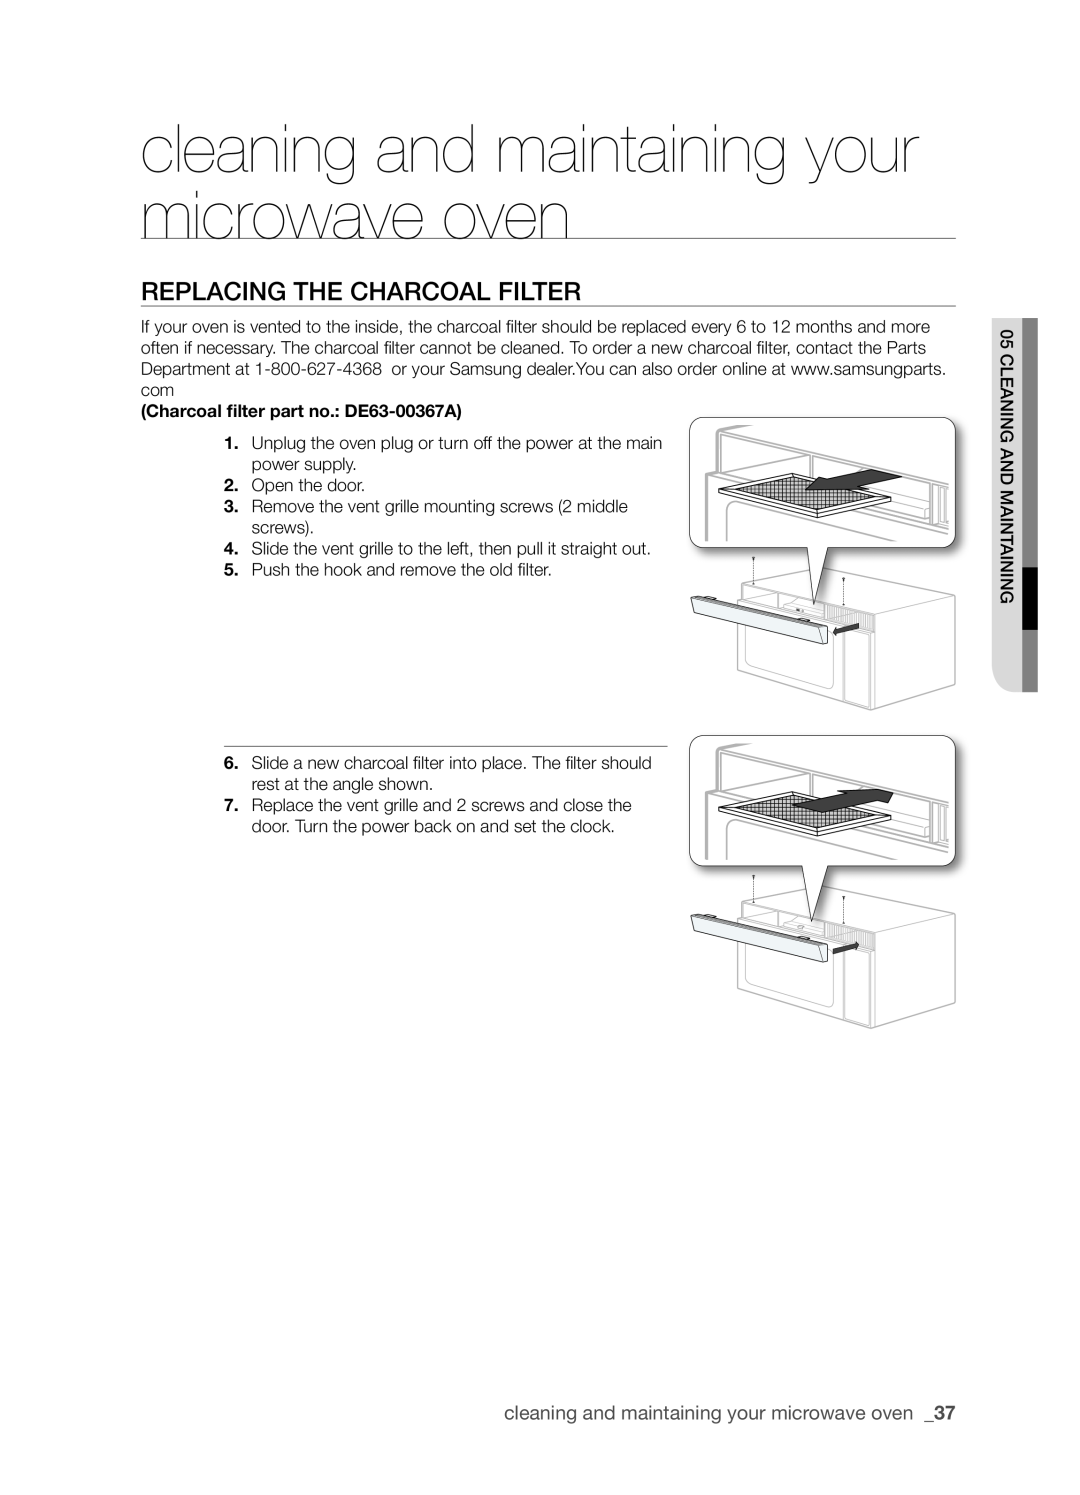 Samsung SMH8165STE user manual Replacing the charcoal filter, cleaning and maintaining your microwave oven 